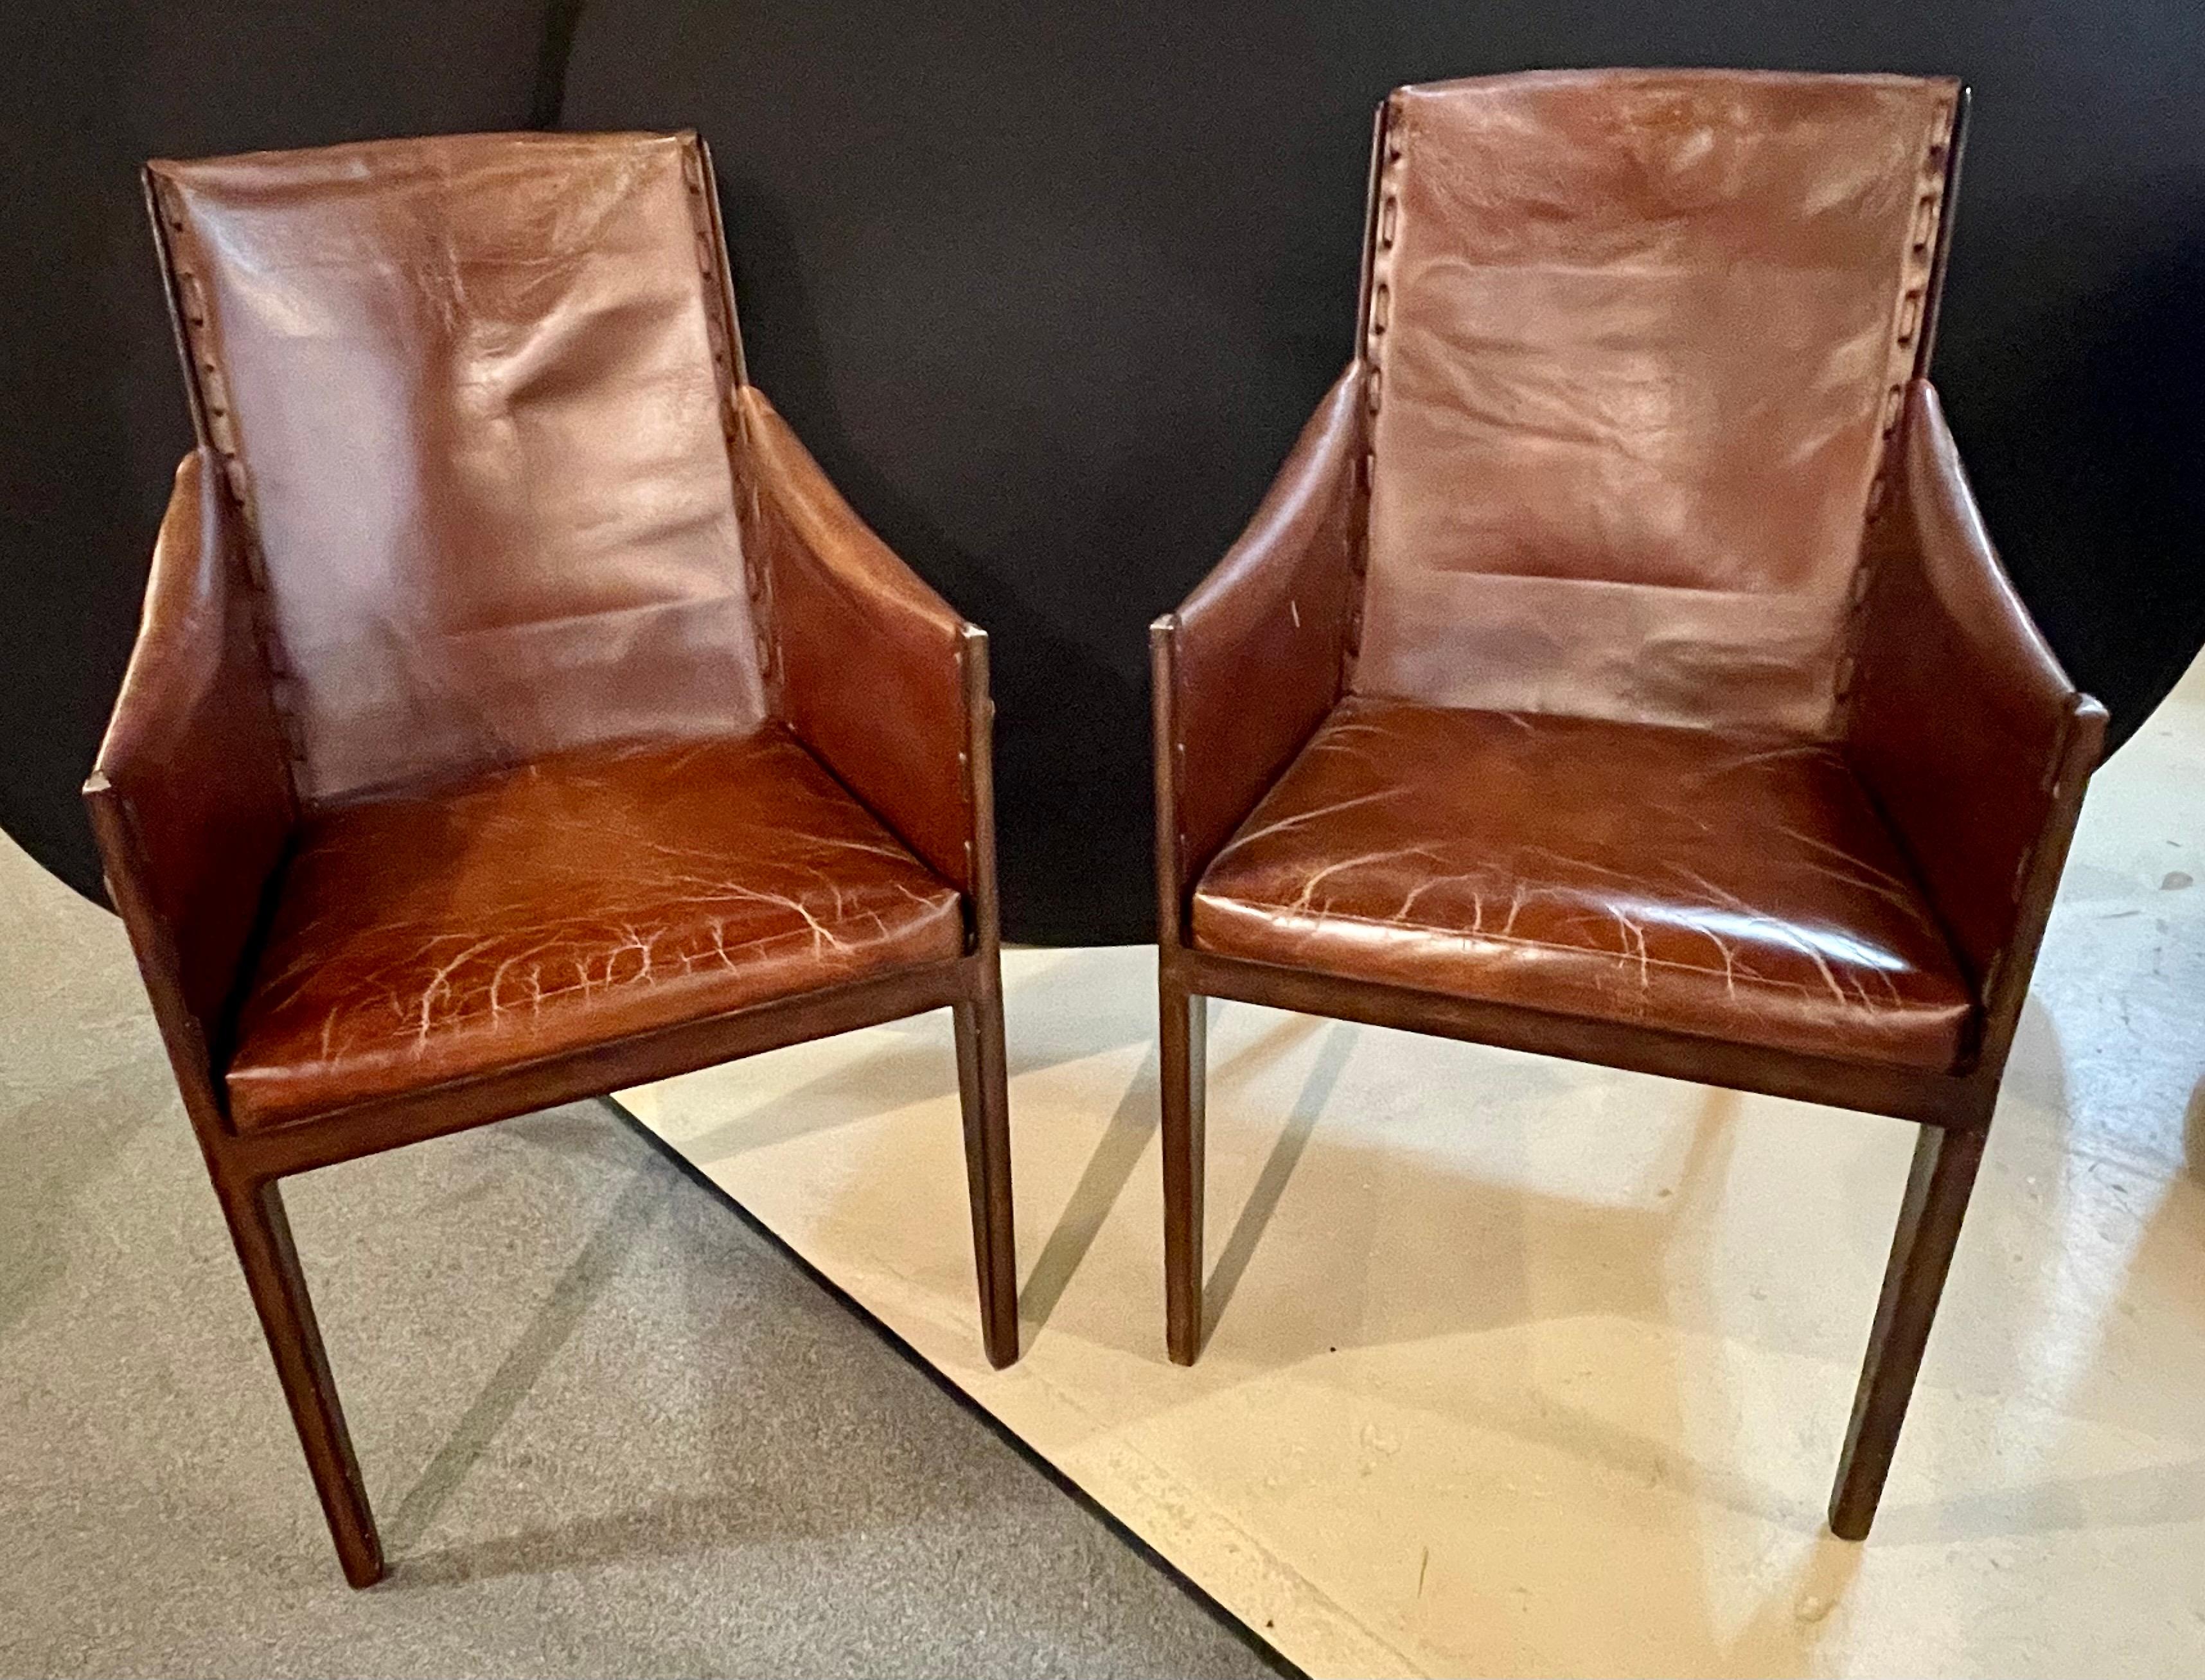 Metal Pair Mid-Century Modern Jean-Michel Frank Style Arm Chairs, Distressed Leather  